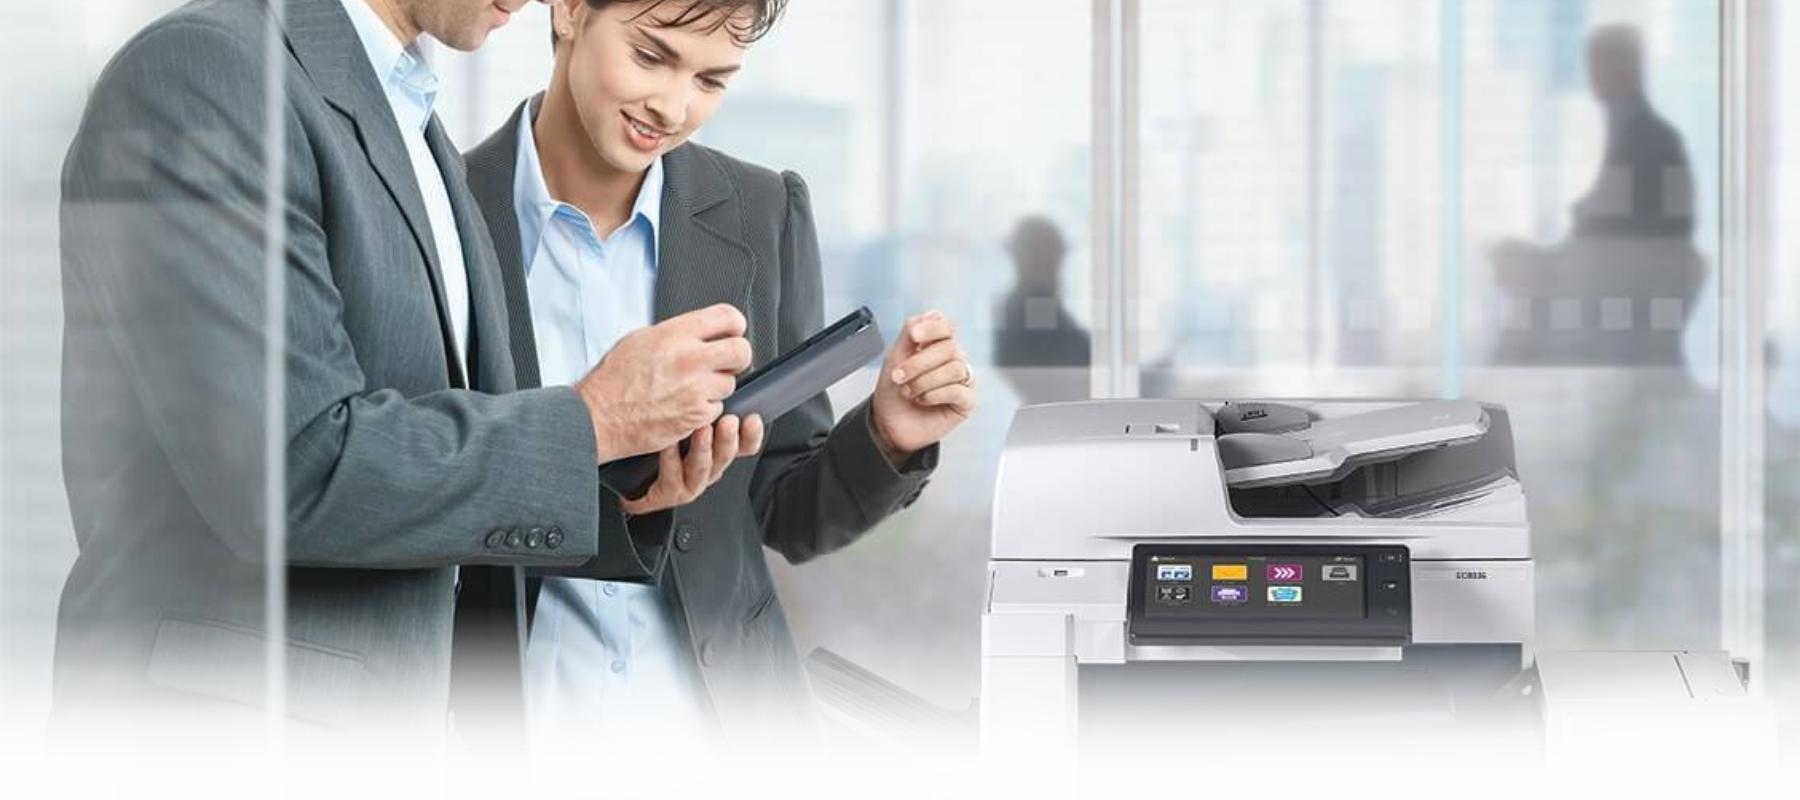 Man and woman standing in an office over a printer or mfp